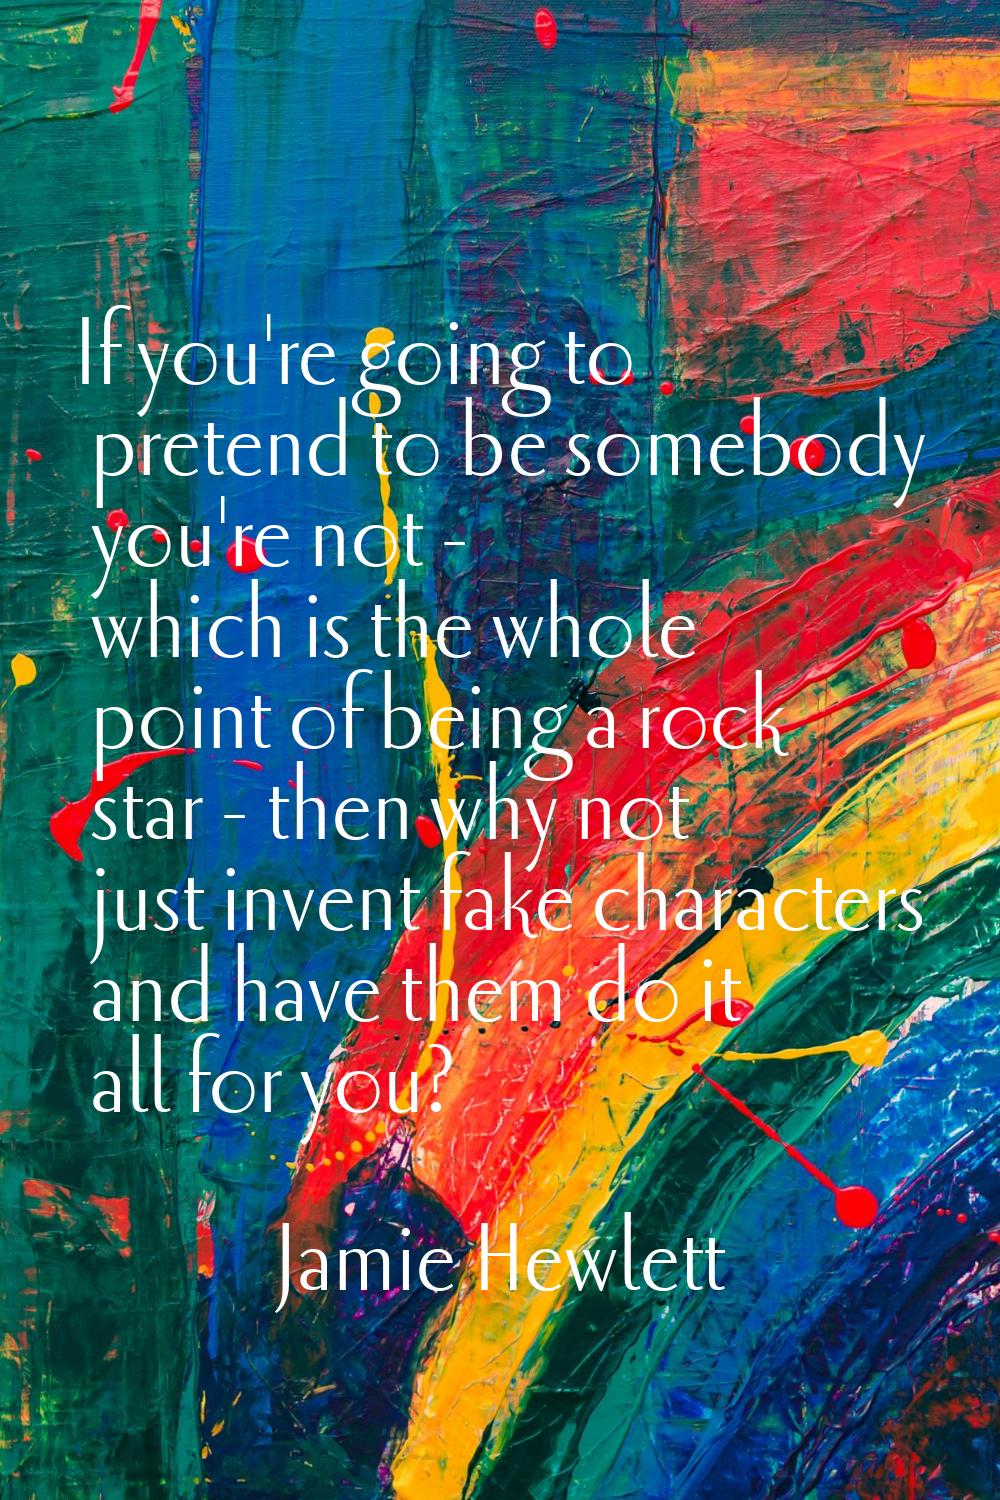 If you're going to pretend to be somebody you're not - which is the whole point of being a rock sta